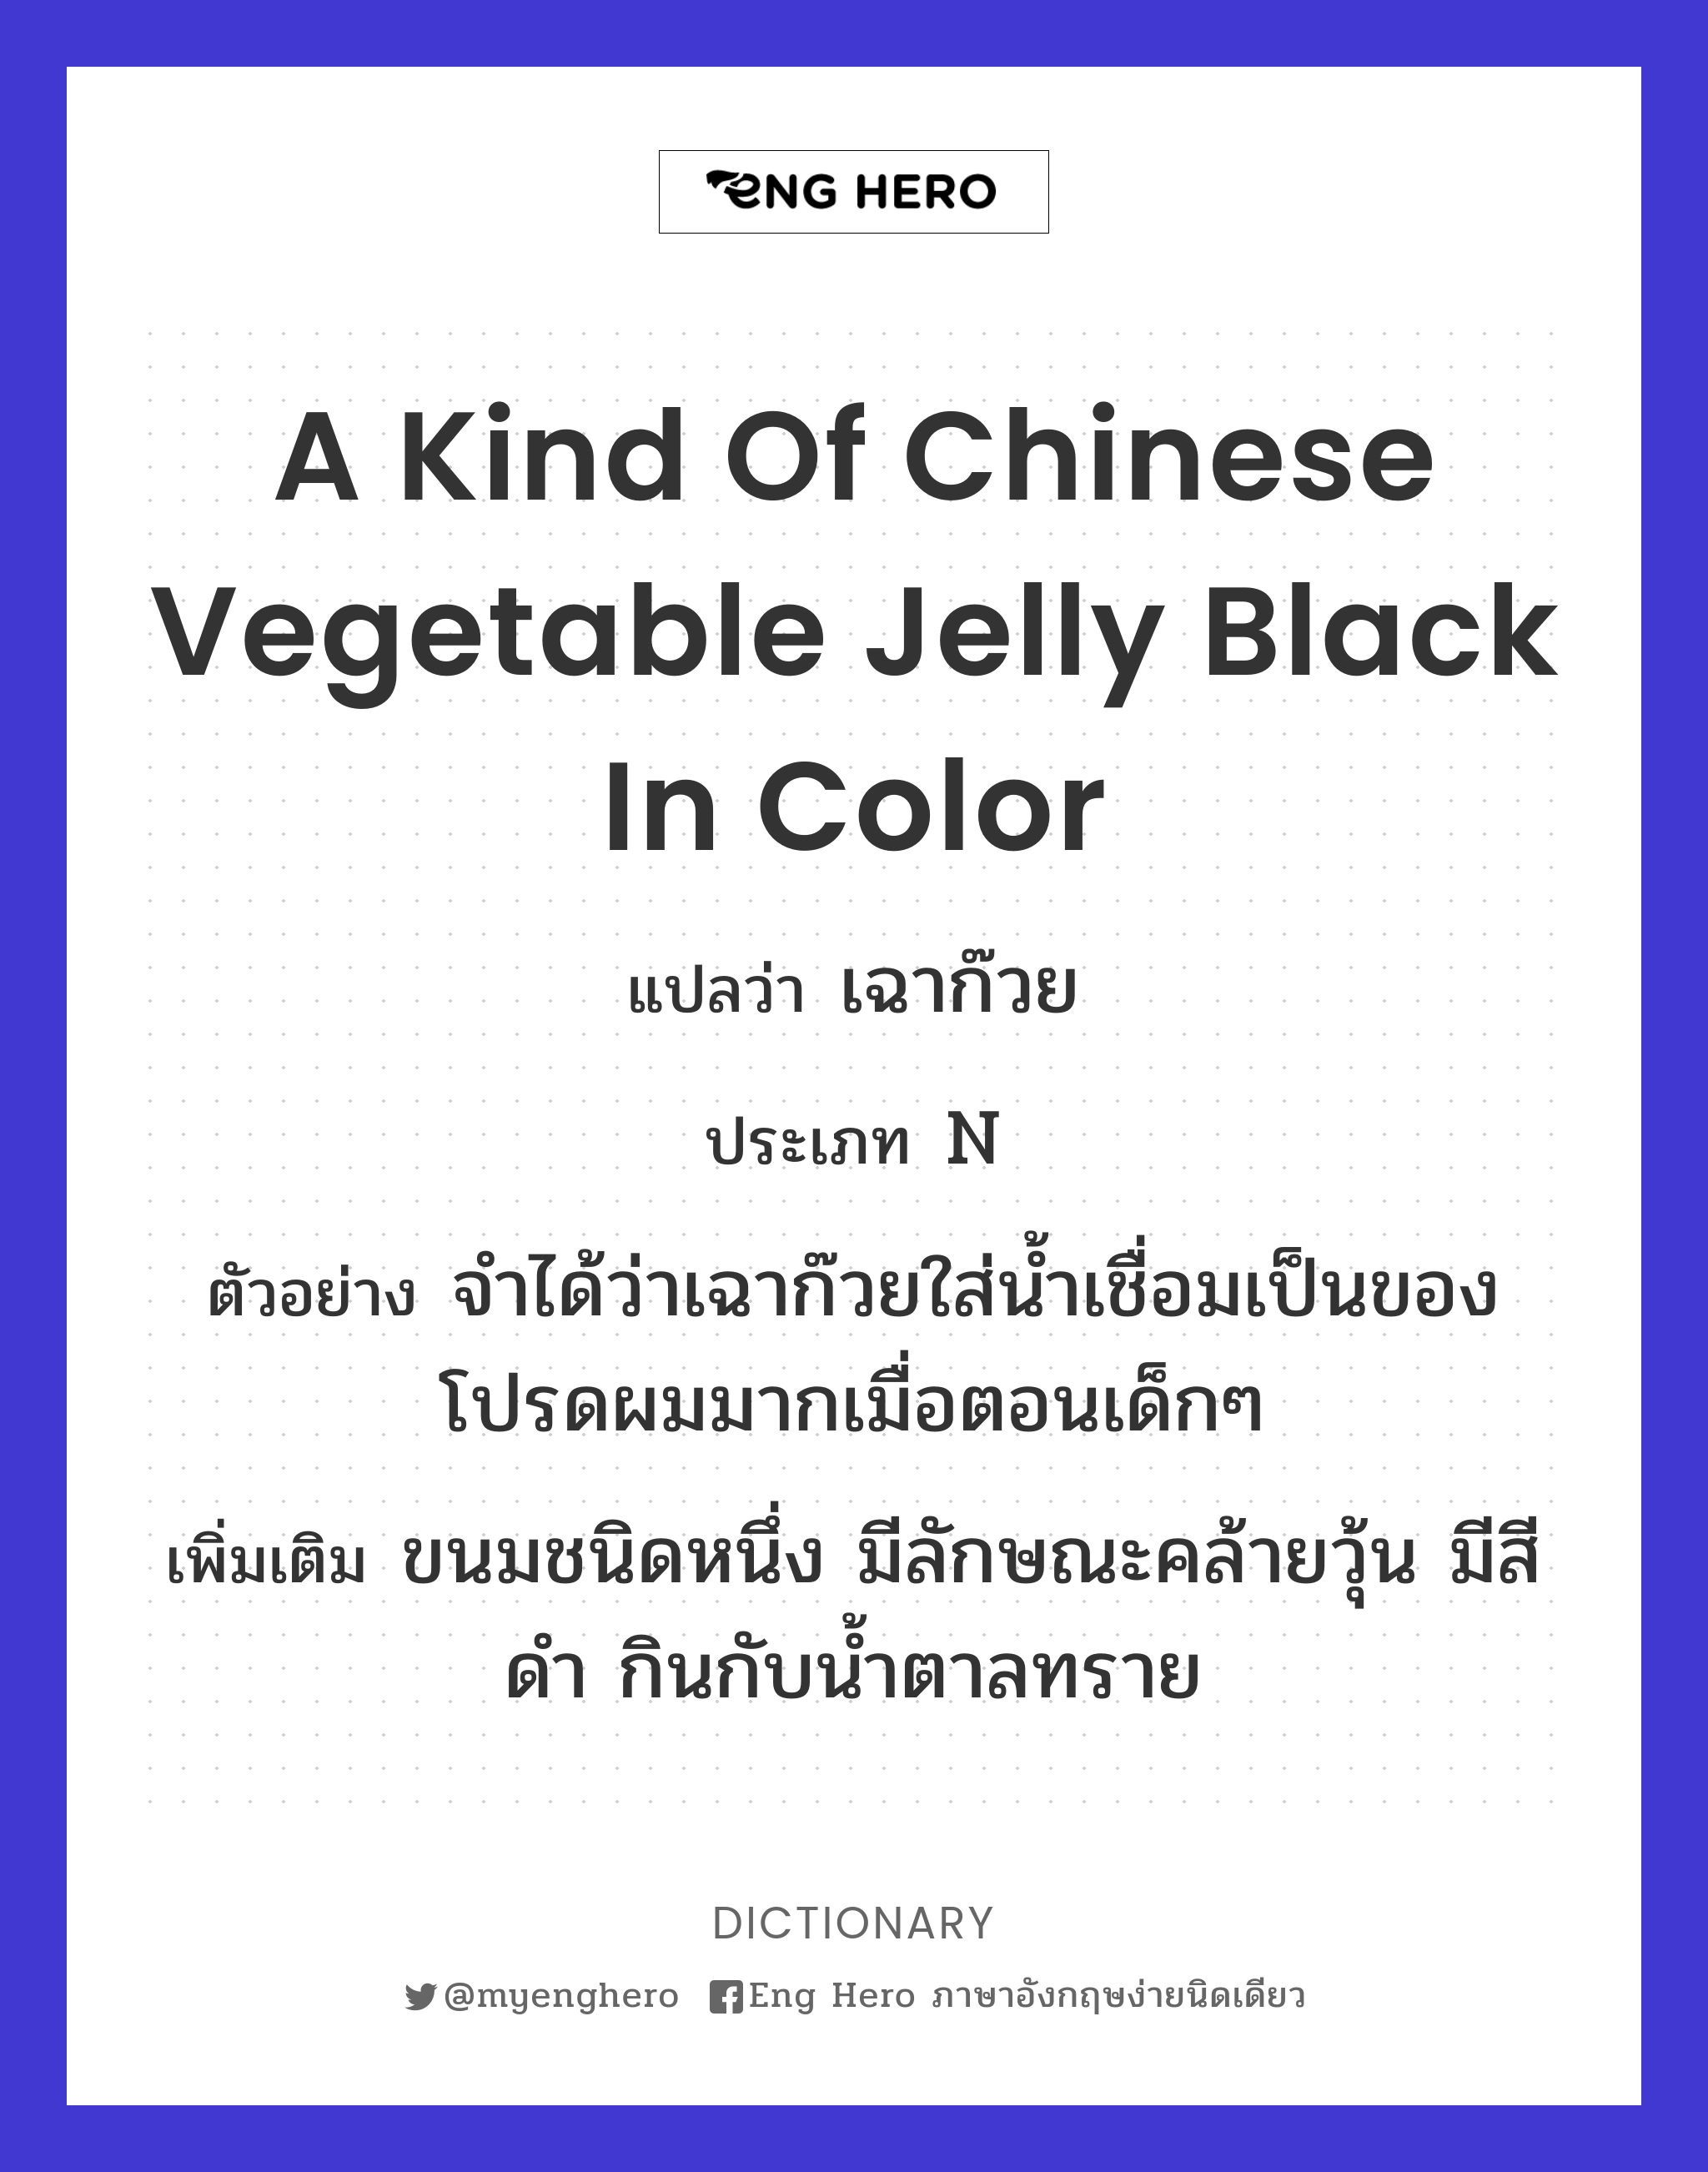 a kind of Chinese vegetable jelly black in color